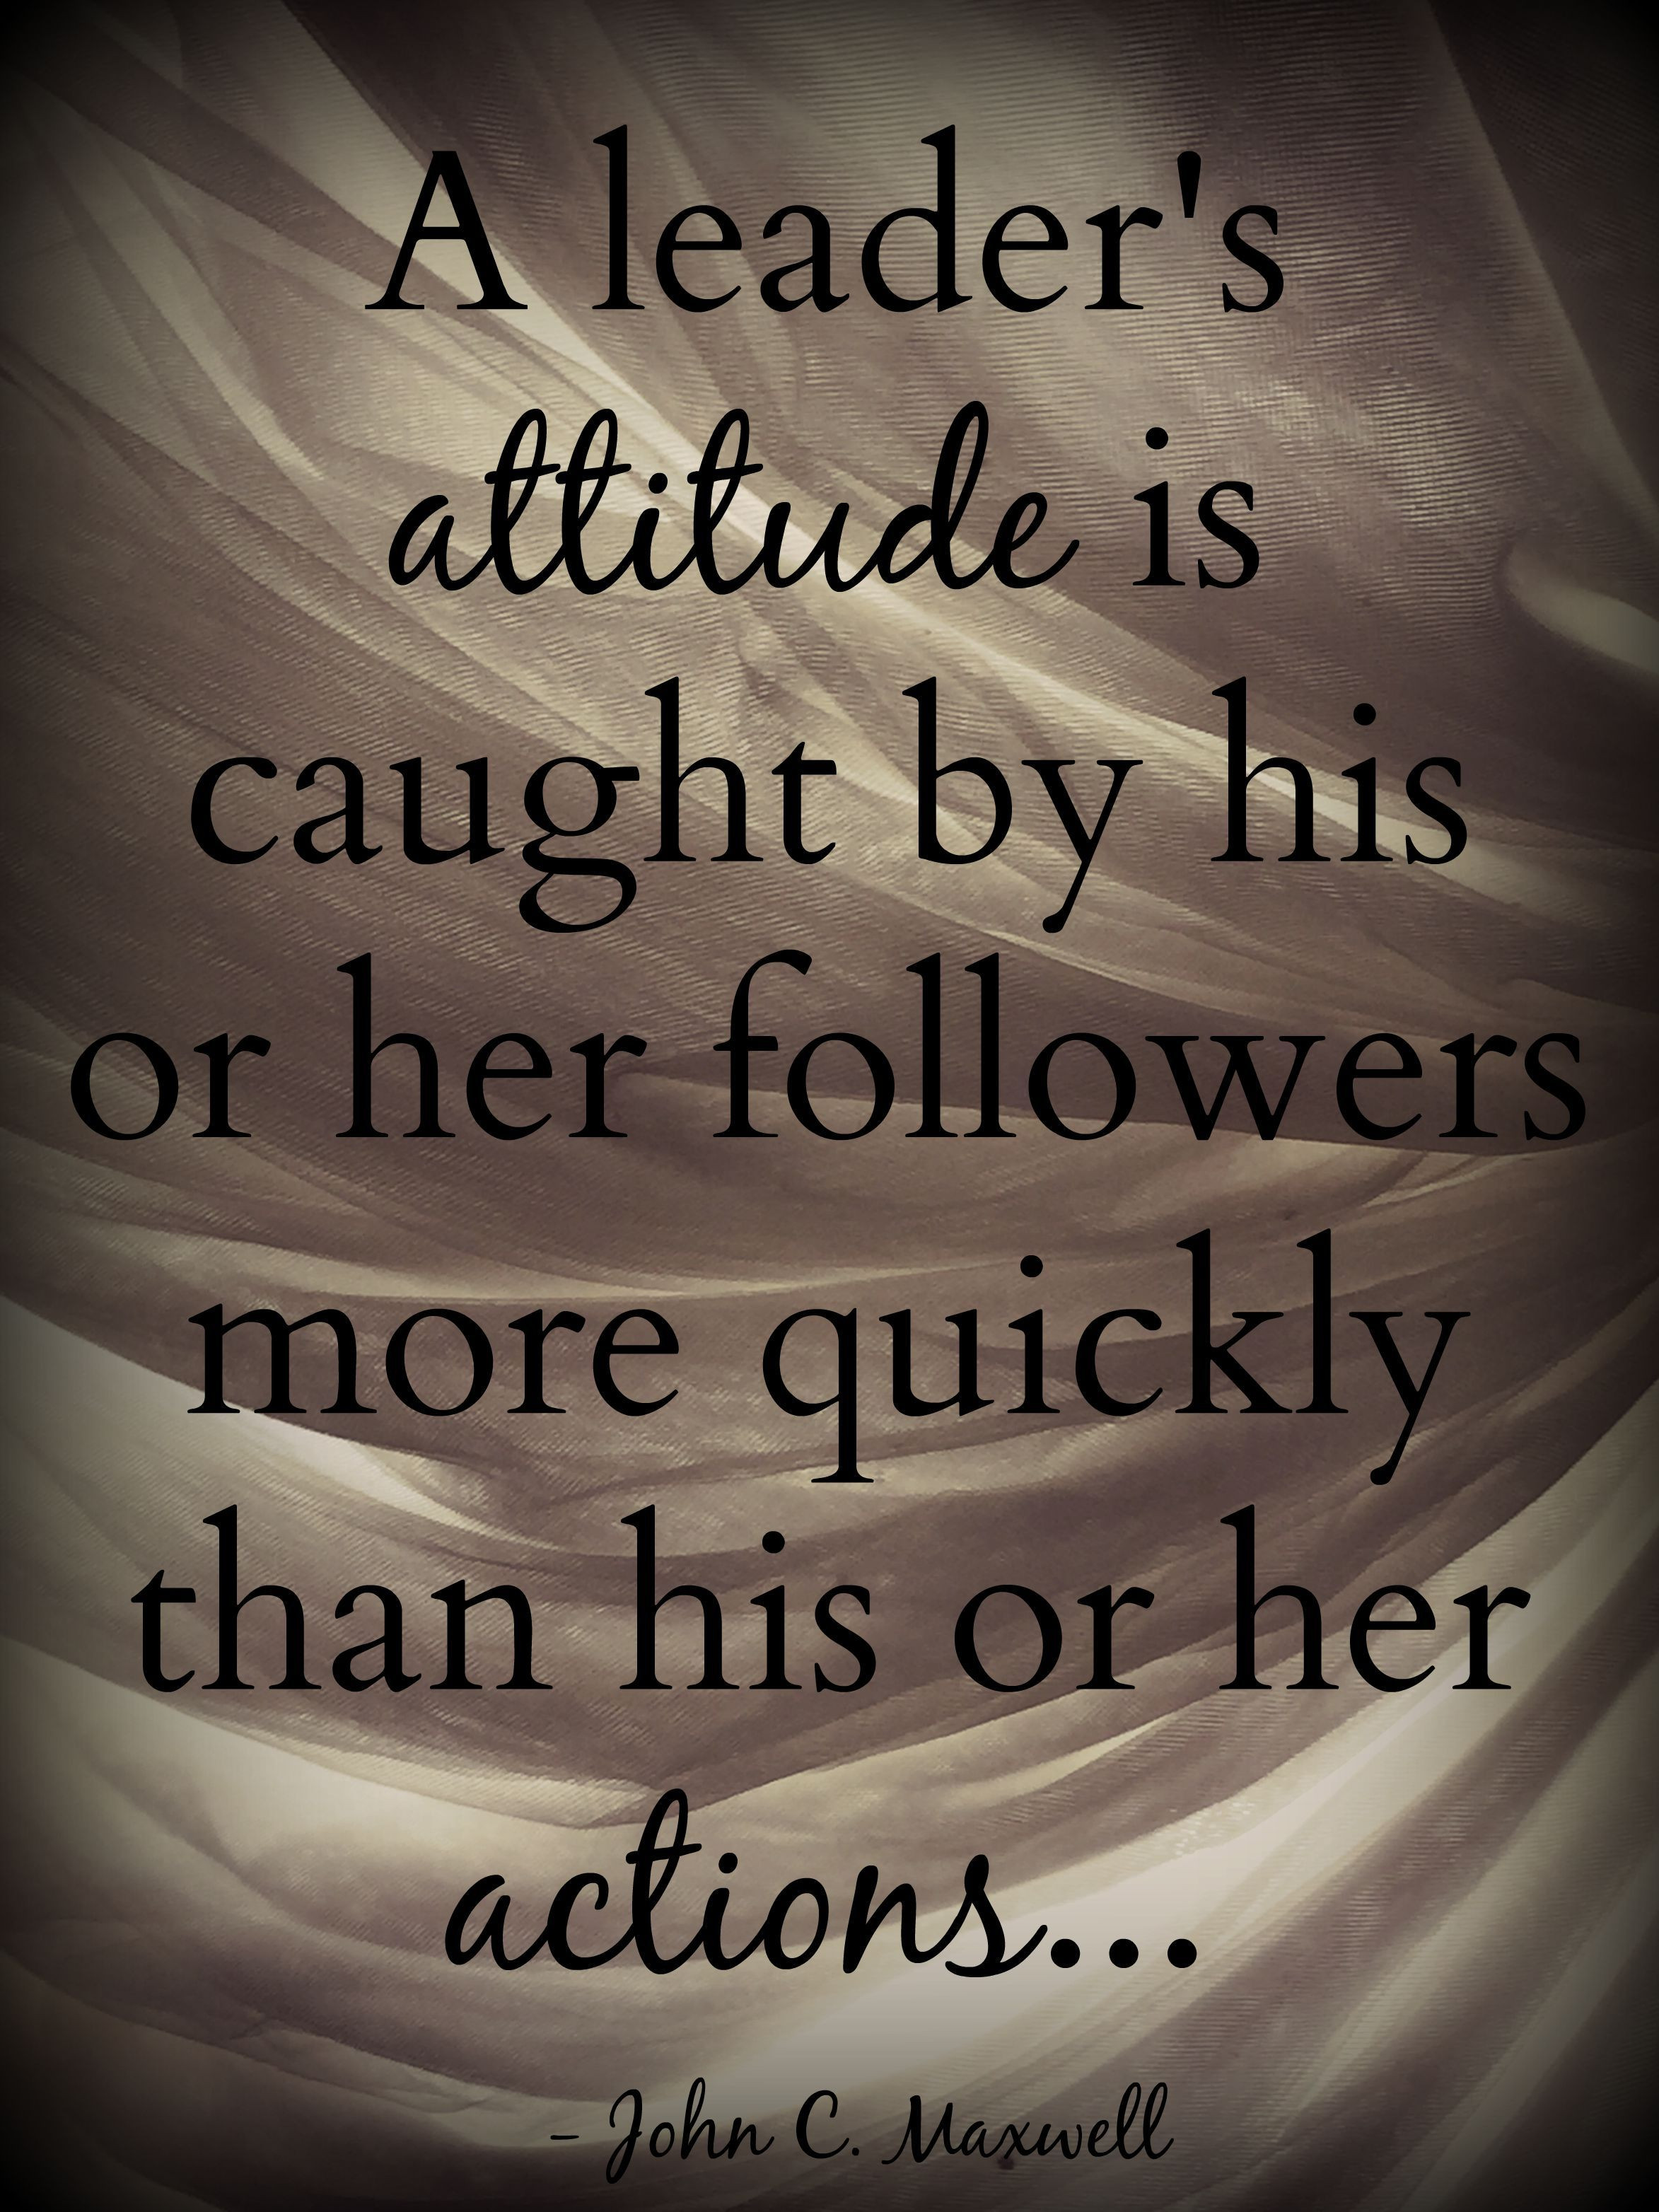 Leadership Development Quotes
 "A leader s attitude is caught by his or her followers